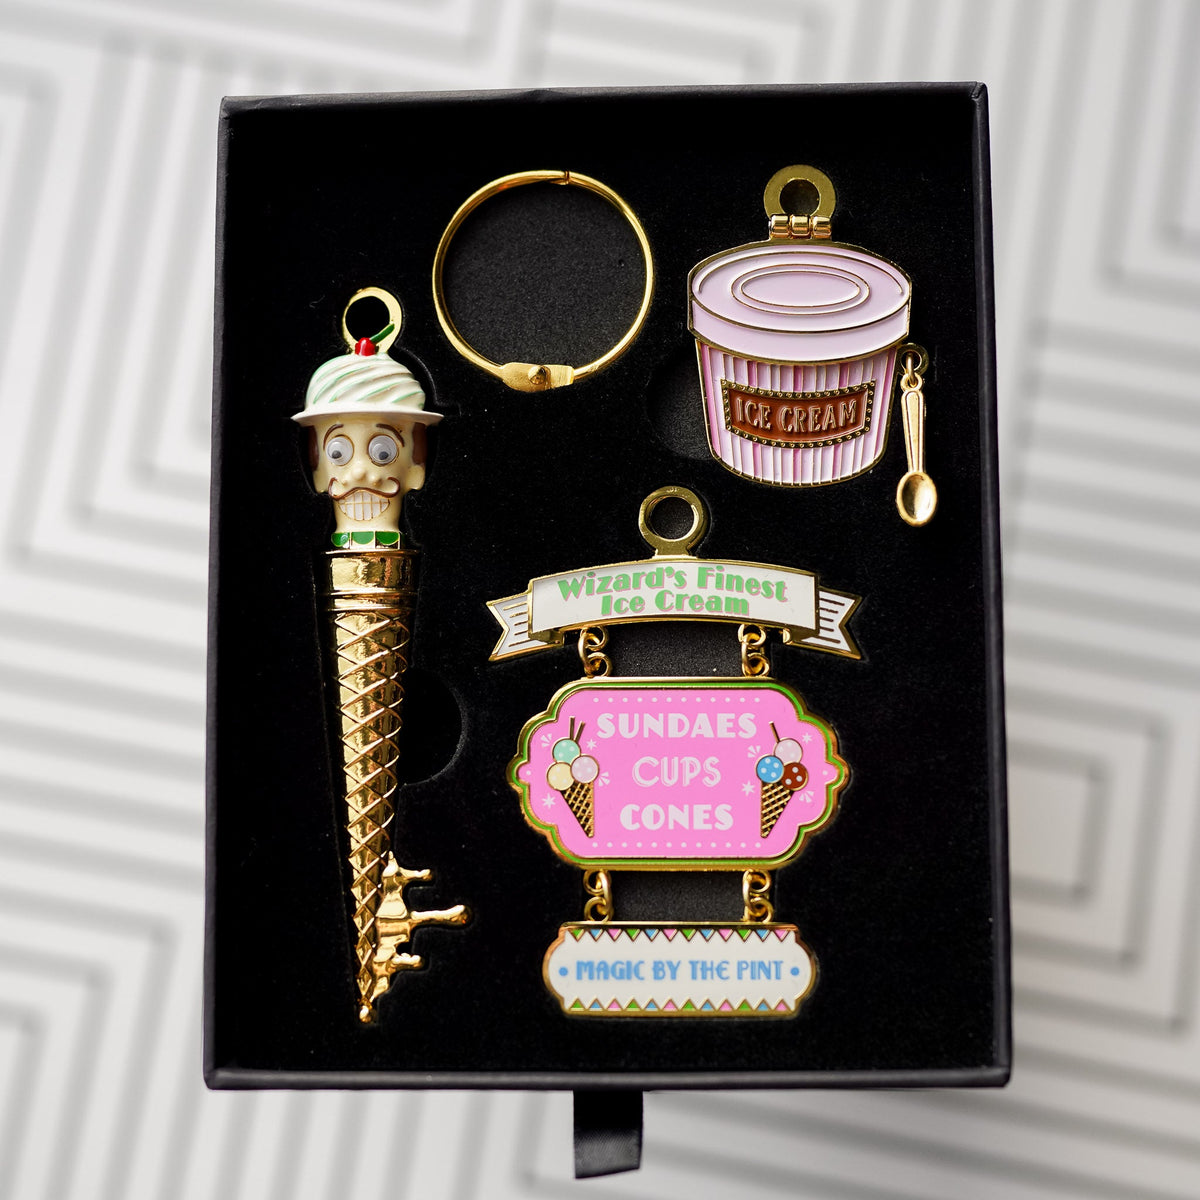 Wizard Ice Cream Shoppe Key with a mustached face, an ice cream bucket charm, and a hanging sign charm.